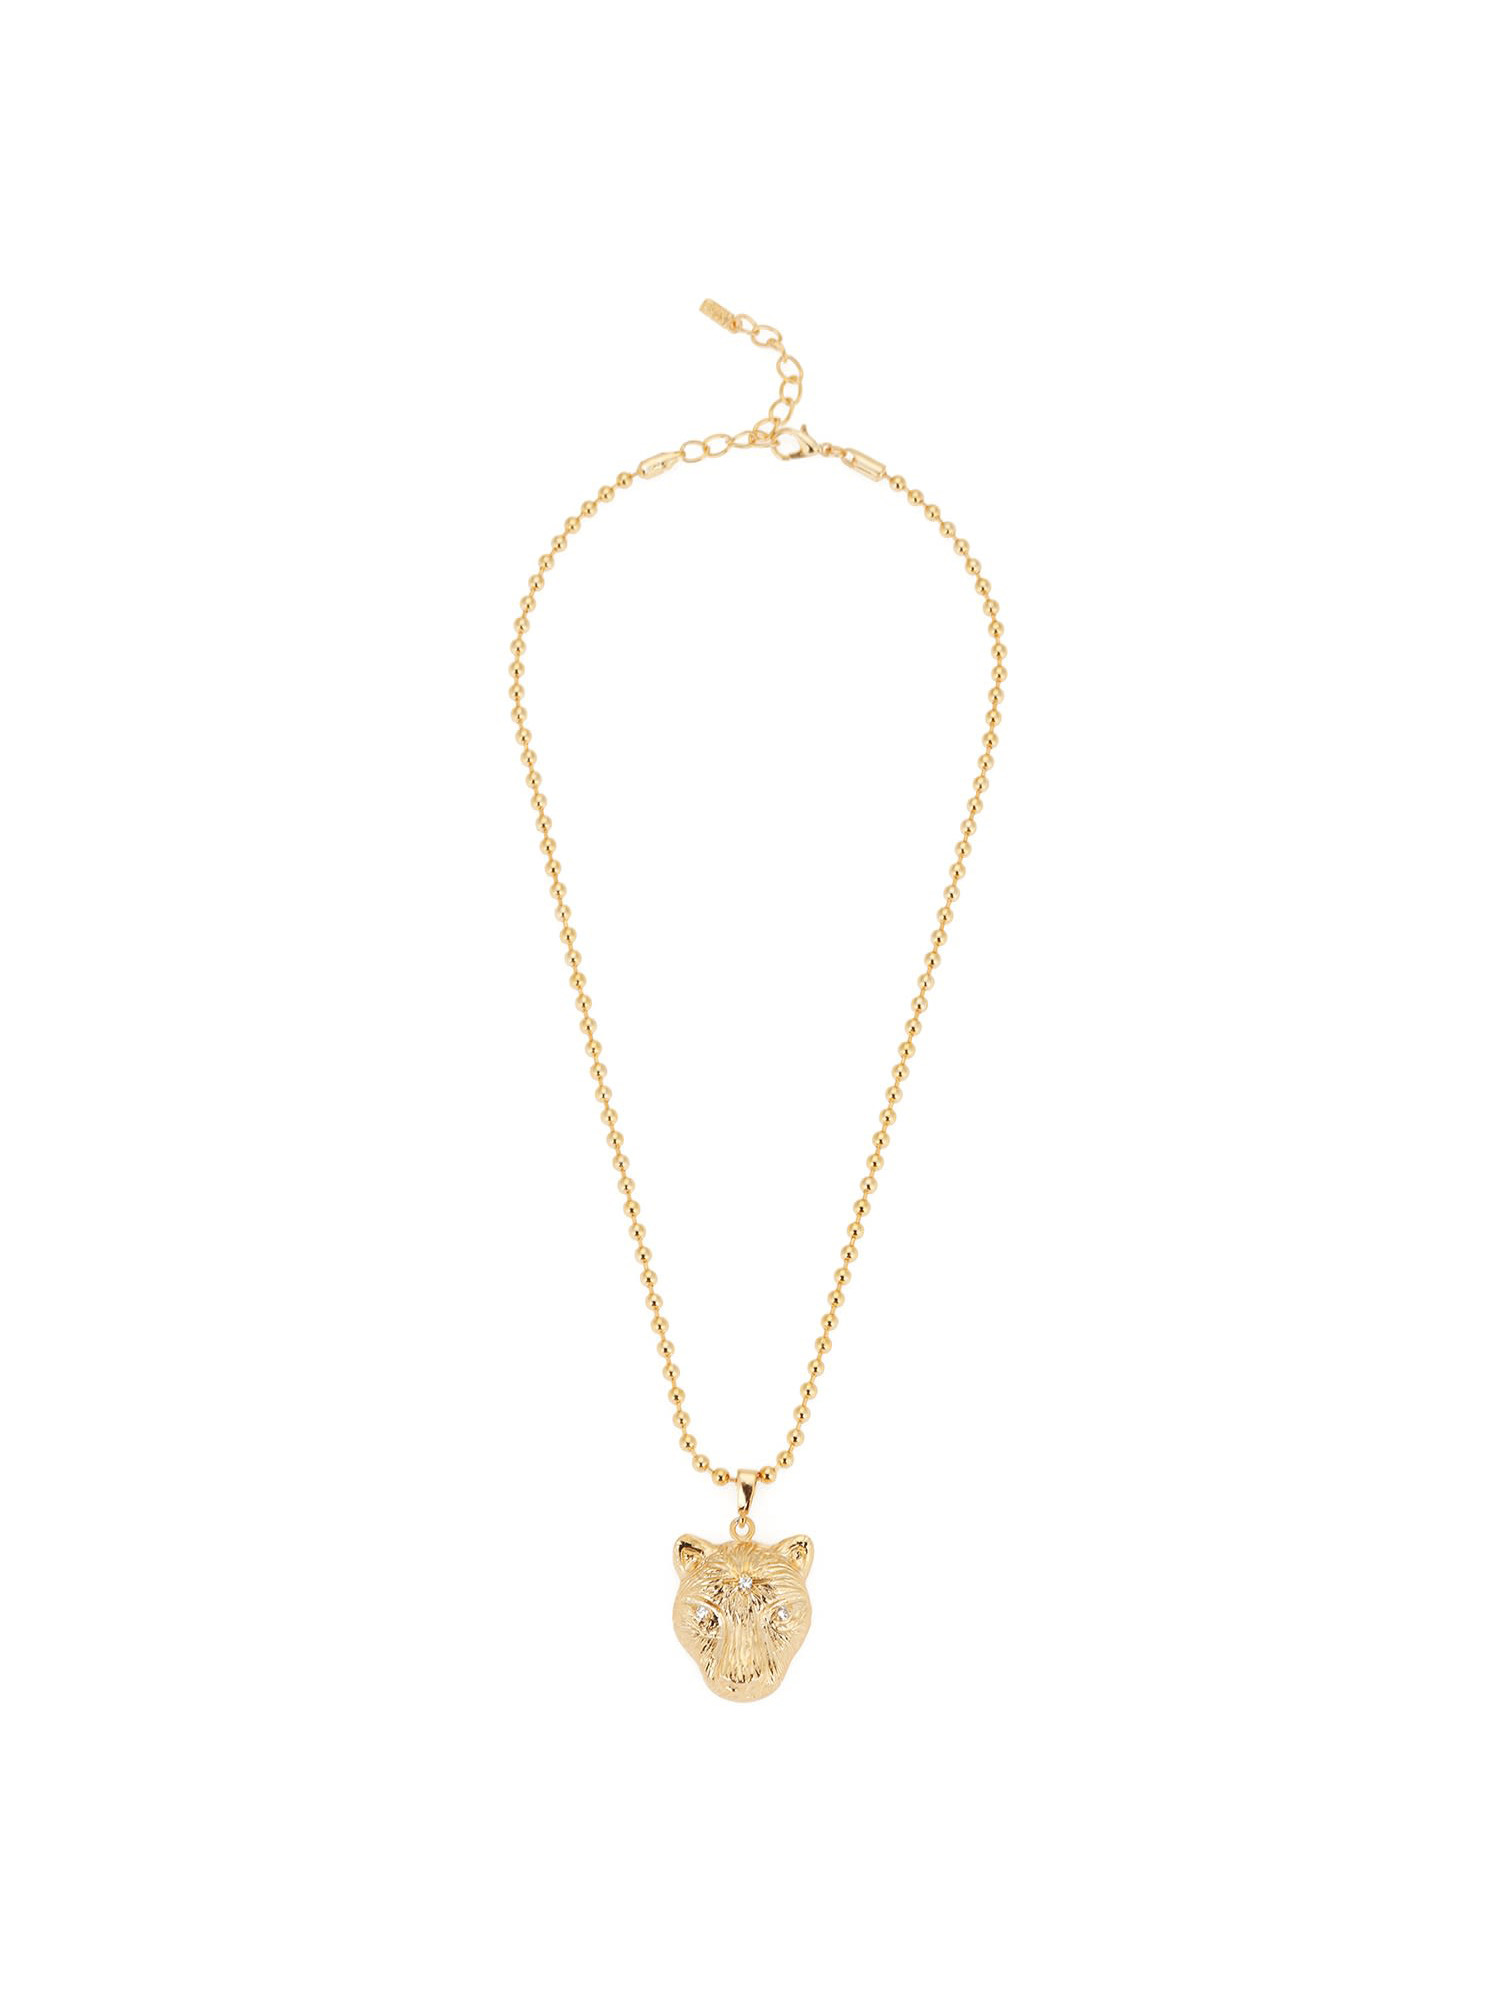 THE WILD TIGRA NECKLACE GOLD